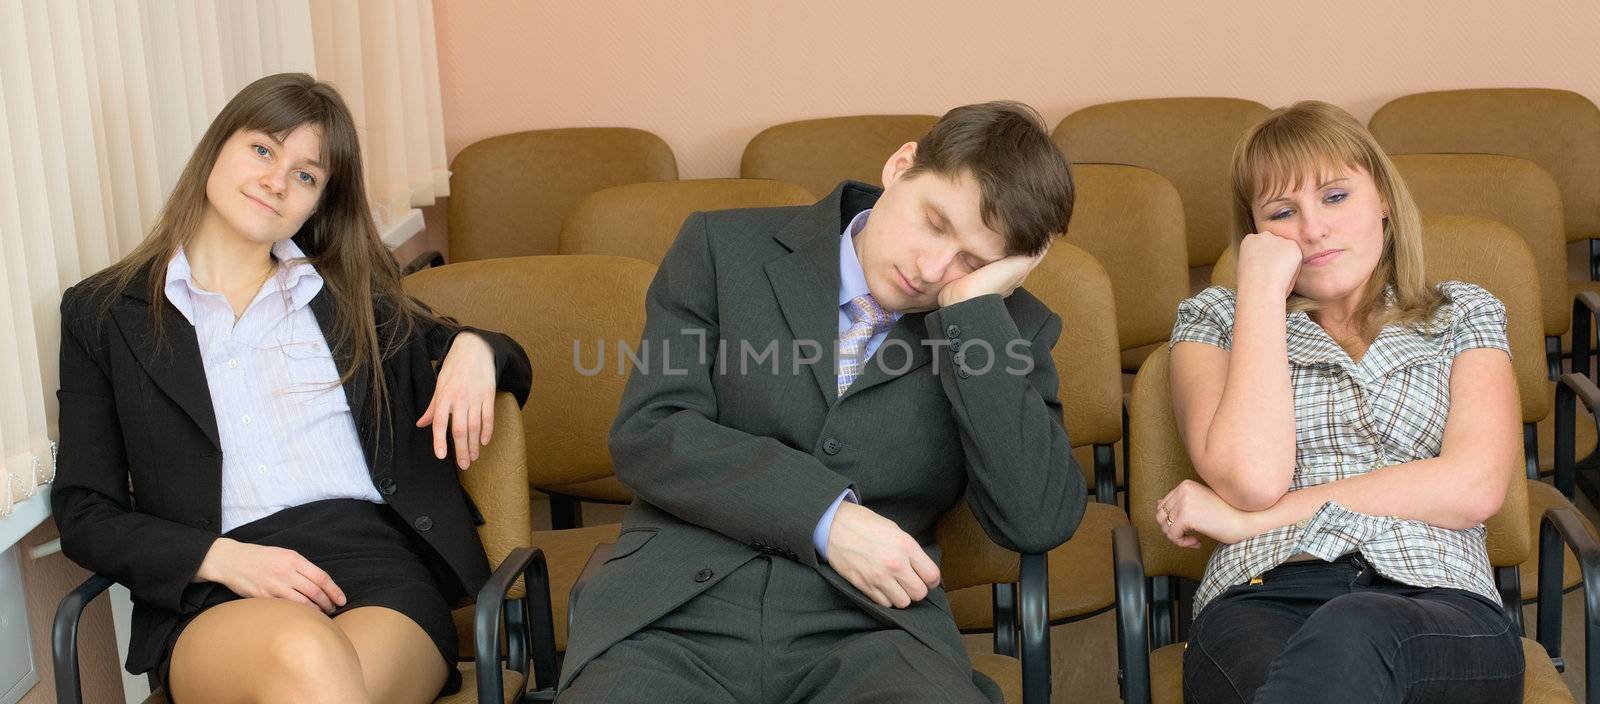 Businessman has fallen asleep sitting at conference by pzaxe